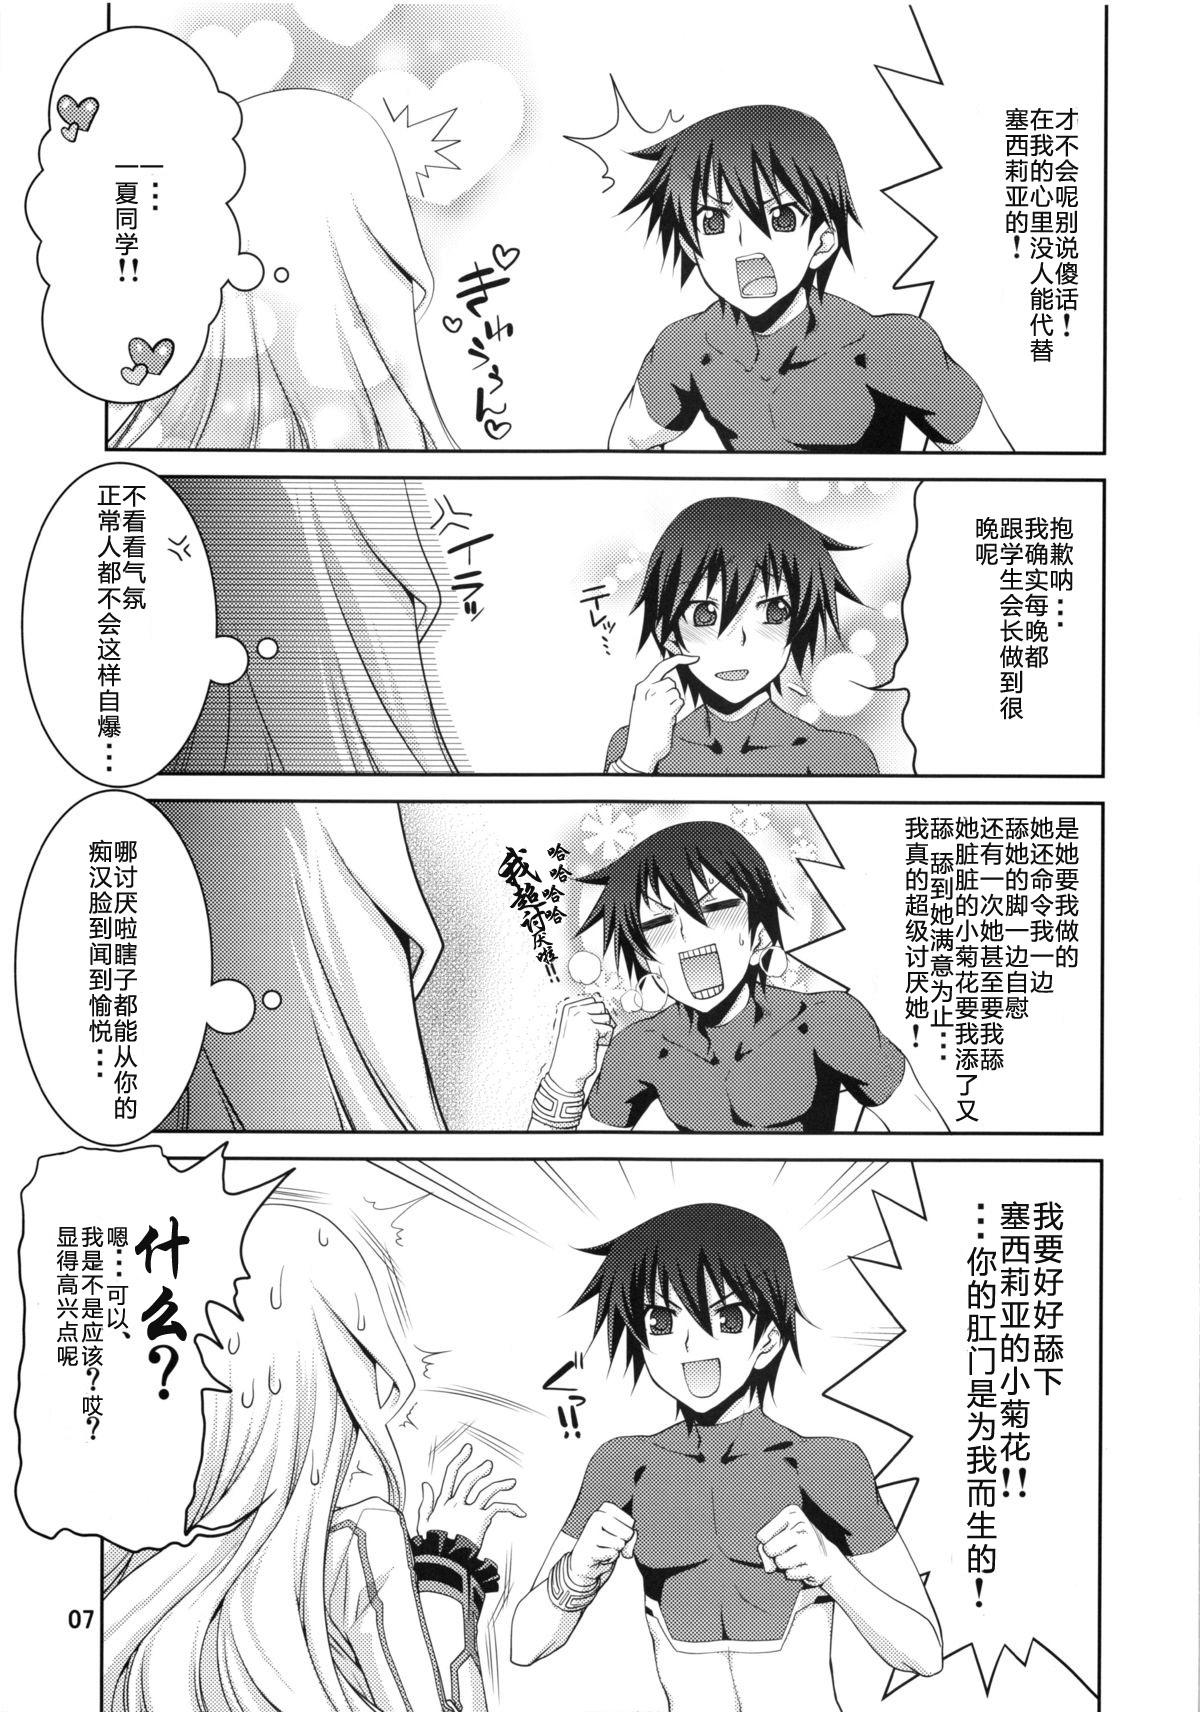 Ass Licking IS 2 - Infinite stratos Humiliation Pov - Page 6